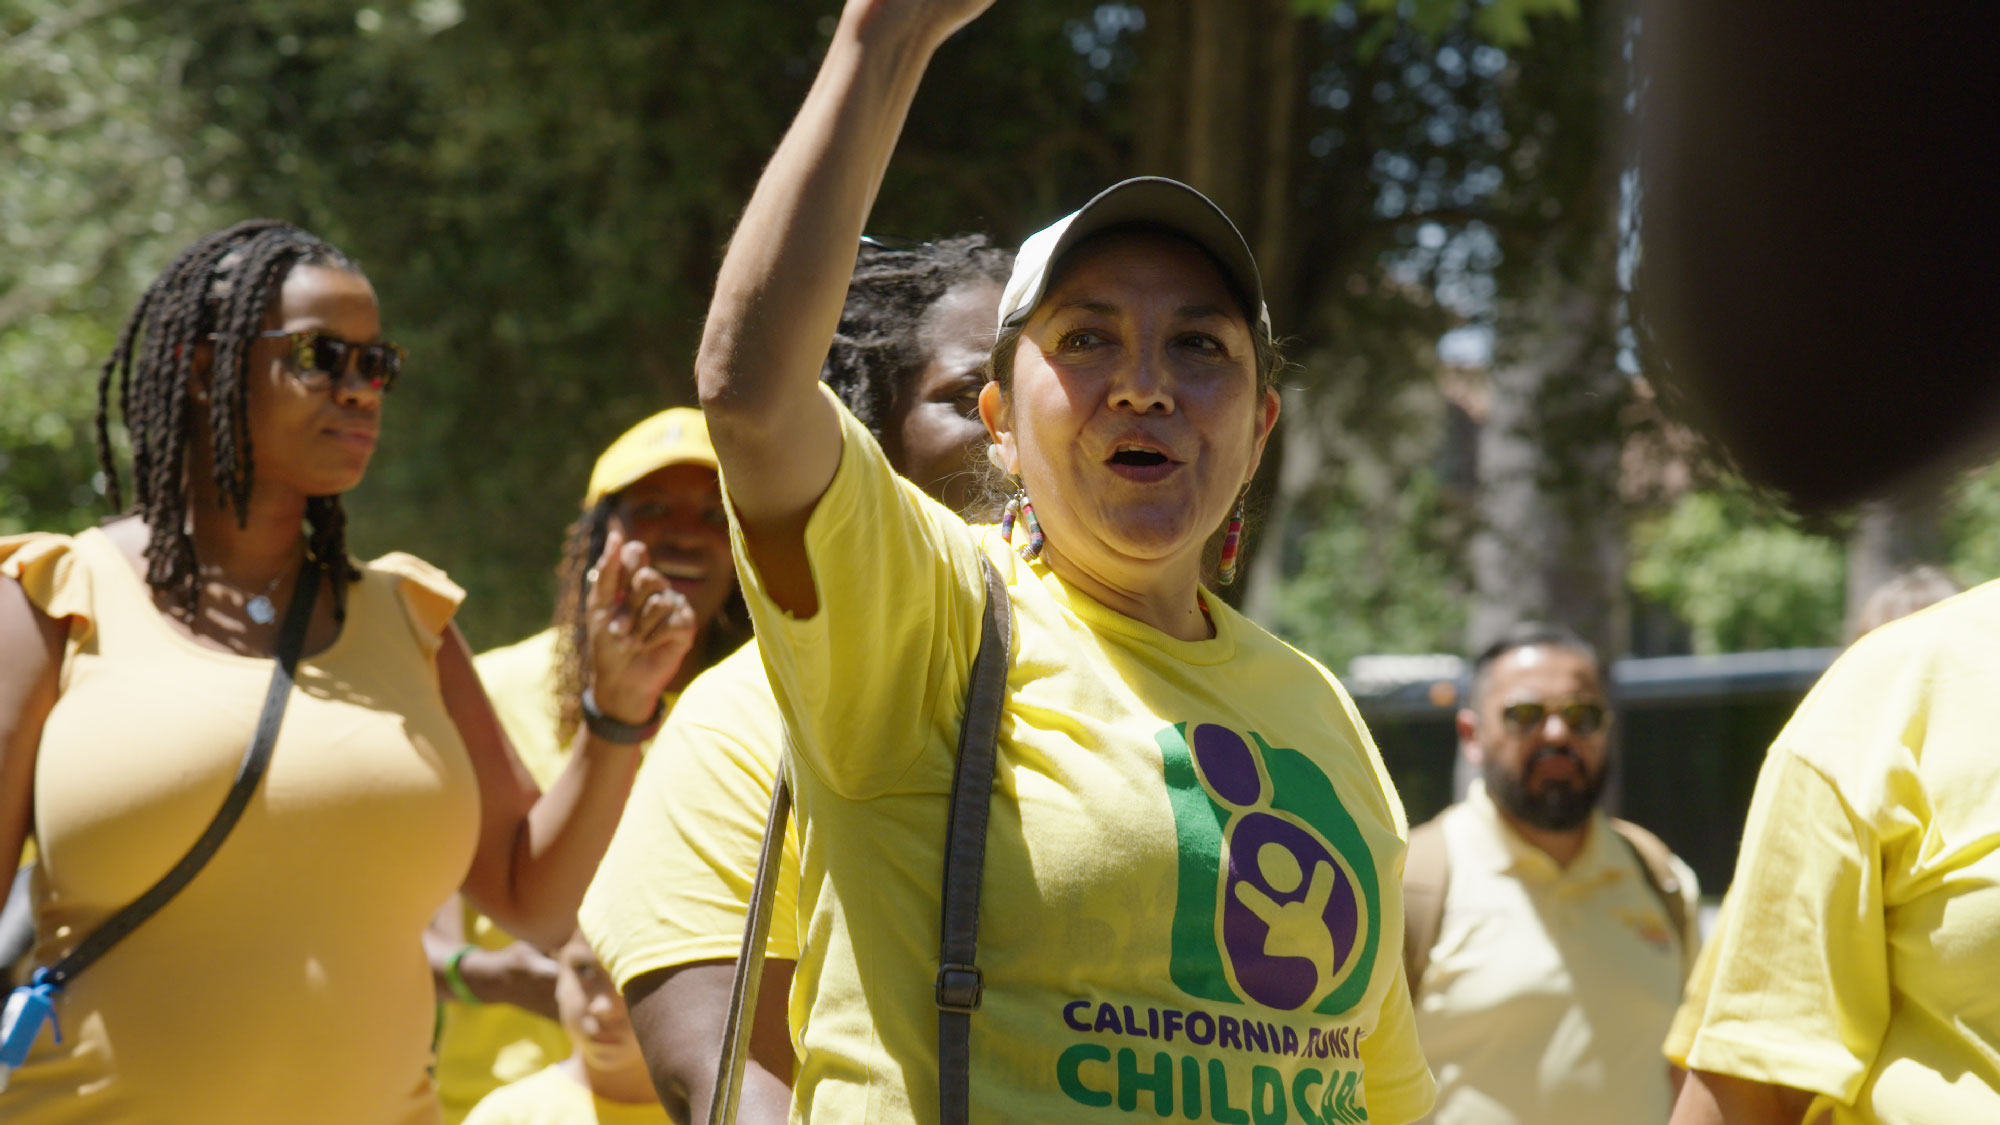 Woman in yellow logo shirt raises arm in a crowd other protesters